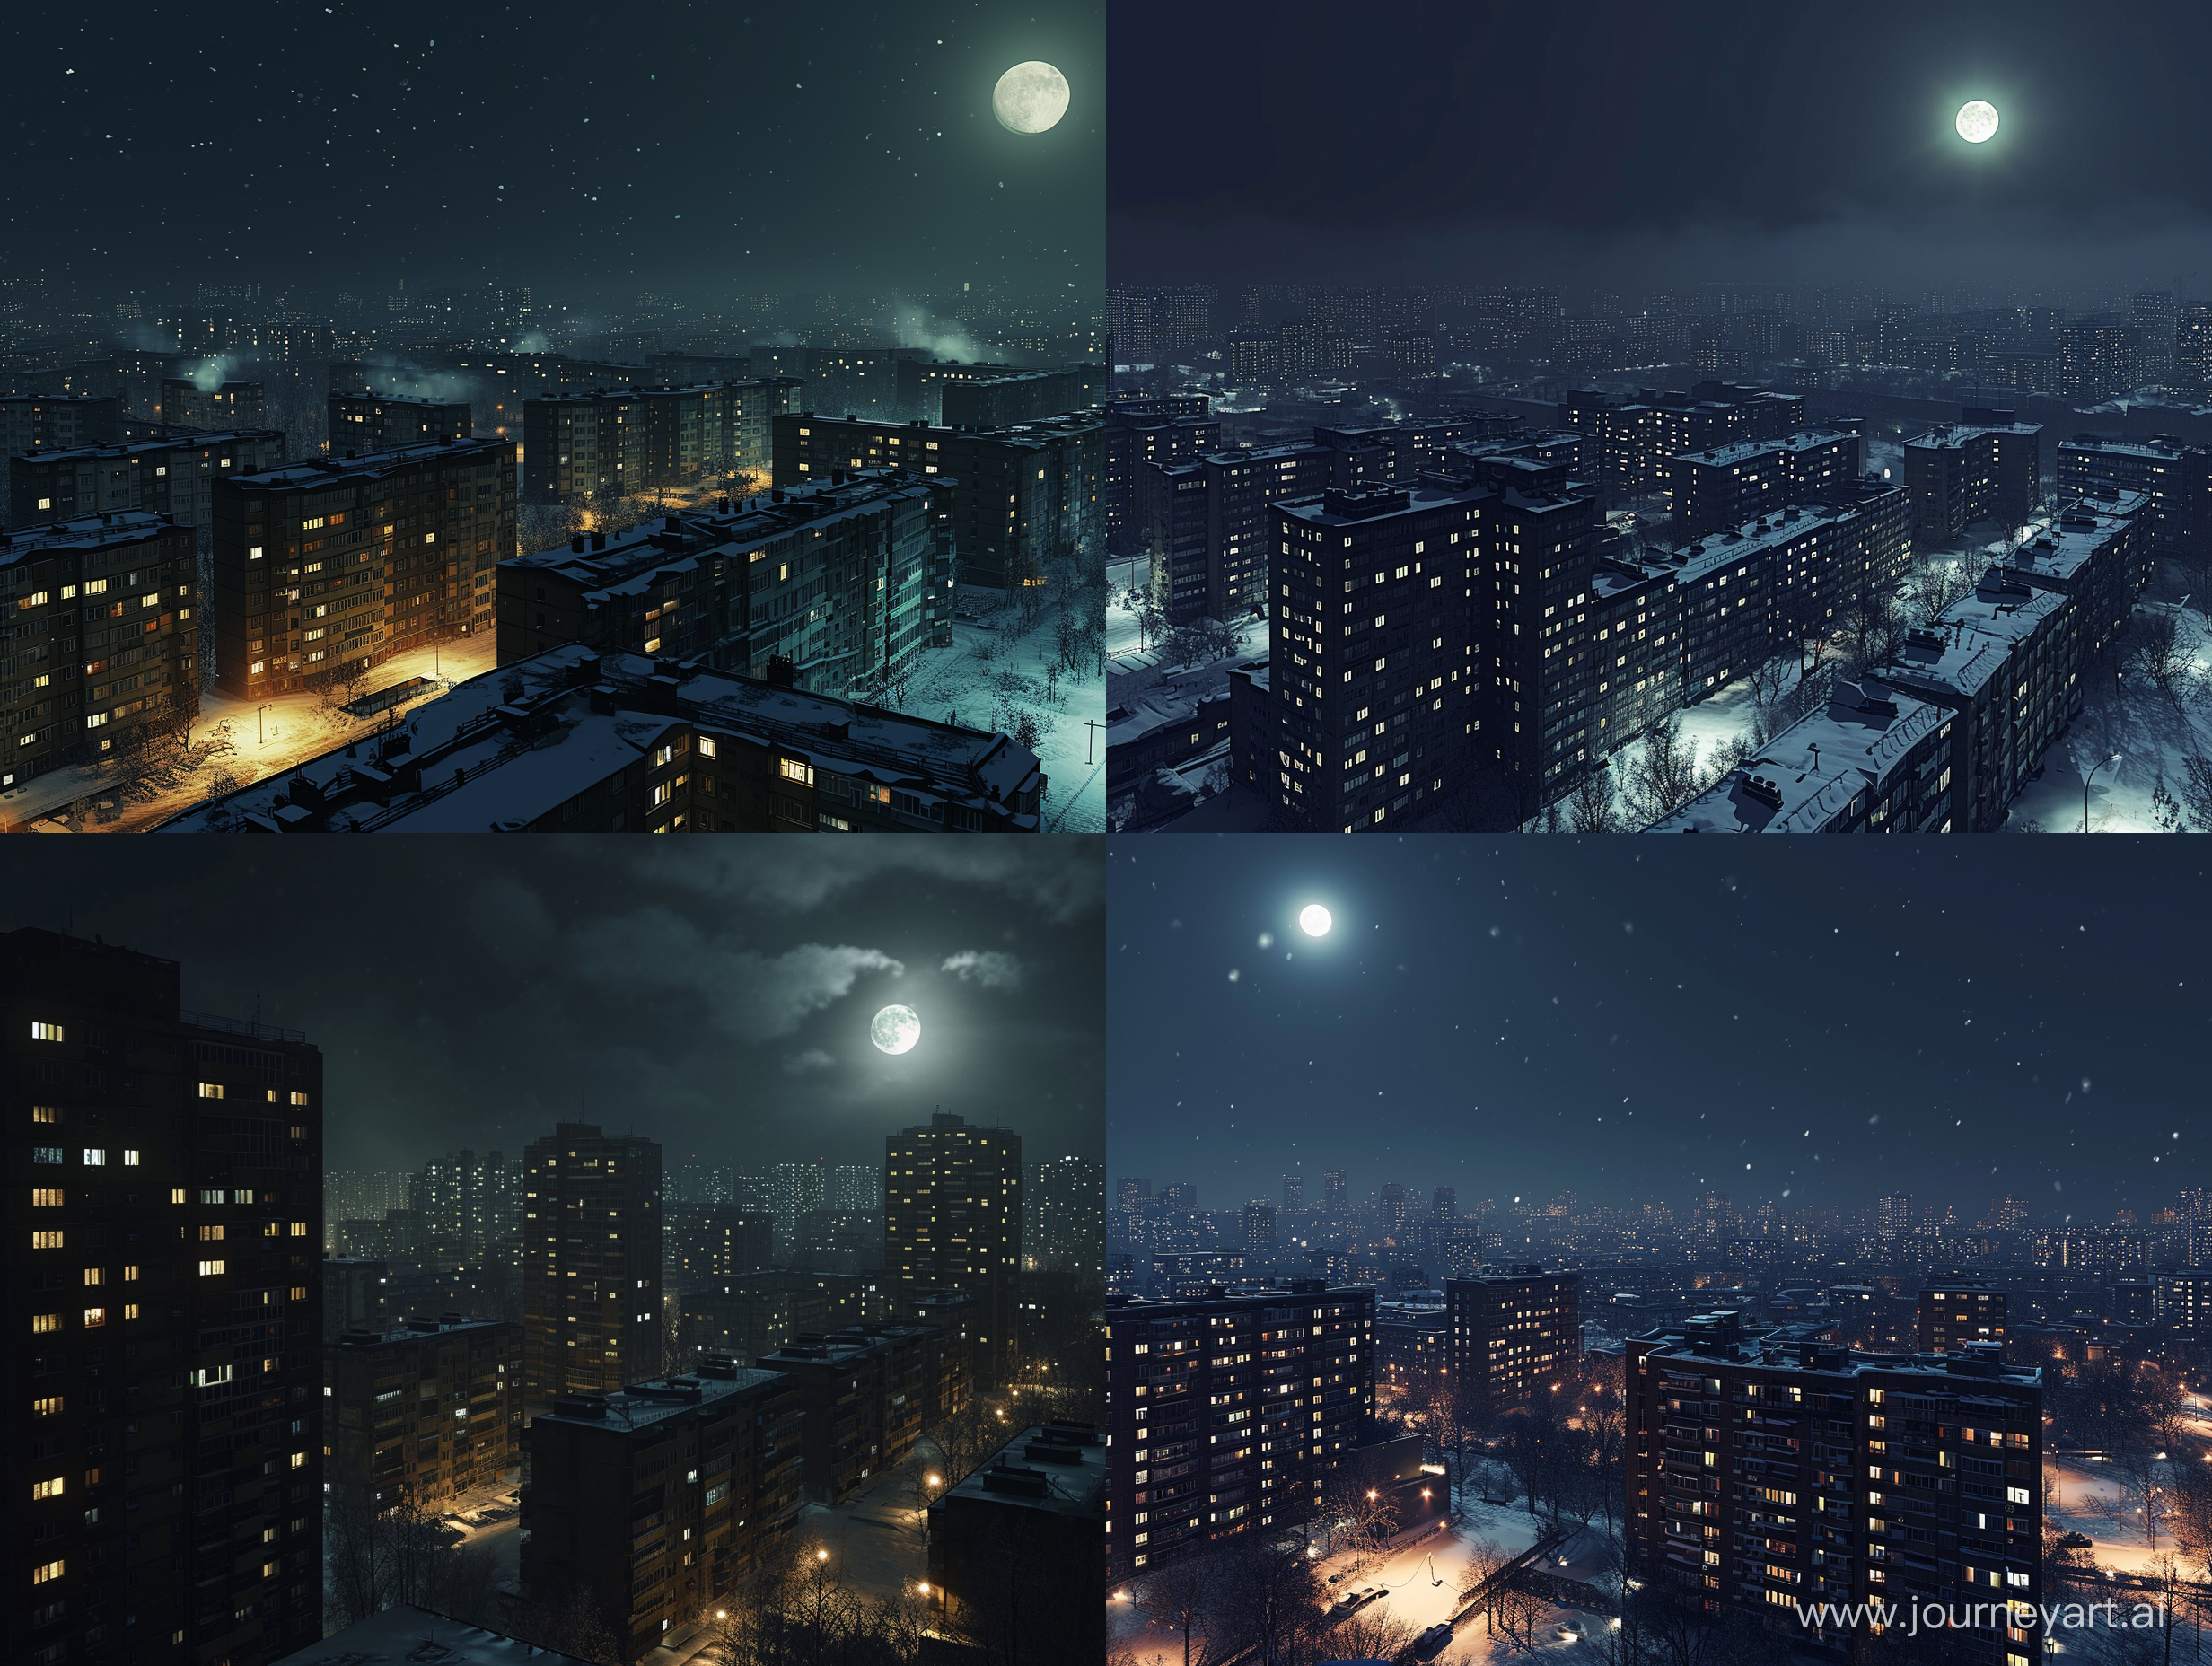 The dark moonlit night illuminates the dark city many block of flats in russia country snow:  the city Russia classic design, with open spaces, clean lines, and an emphasis on functionalism, showcasing the essence of block of flats in russia ." natural light, extra sharp, hyper detailed, hyper-realistic, epic, mega realizm unreal ungine 4k 